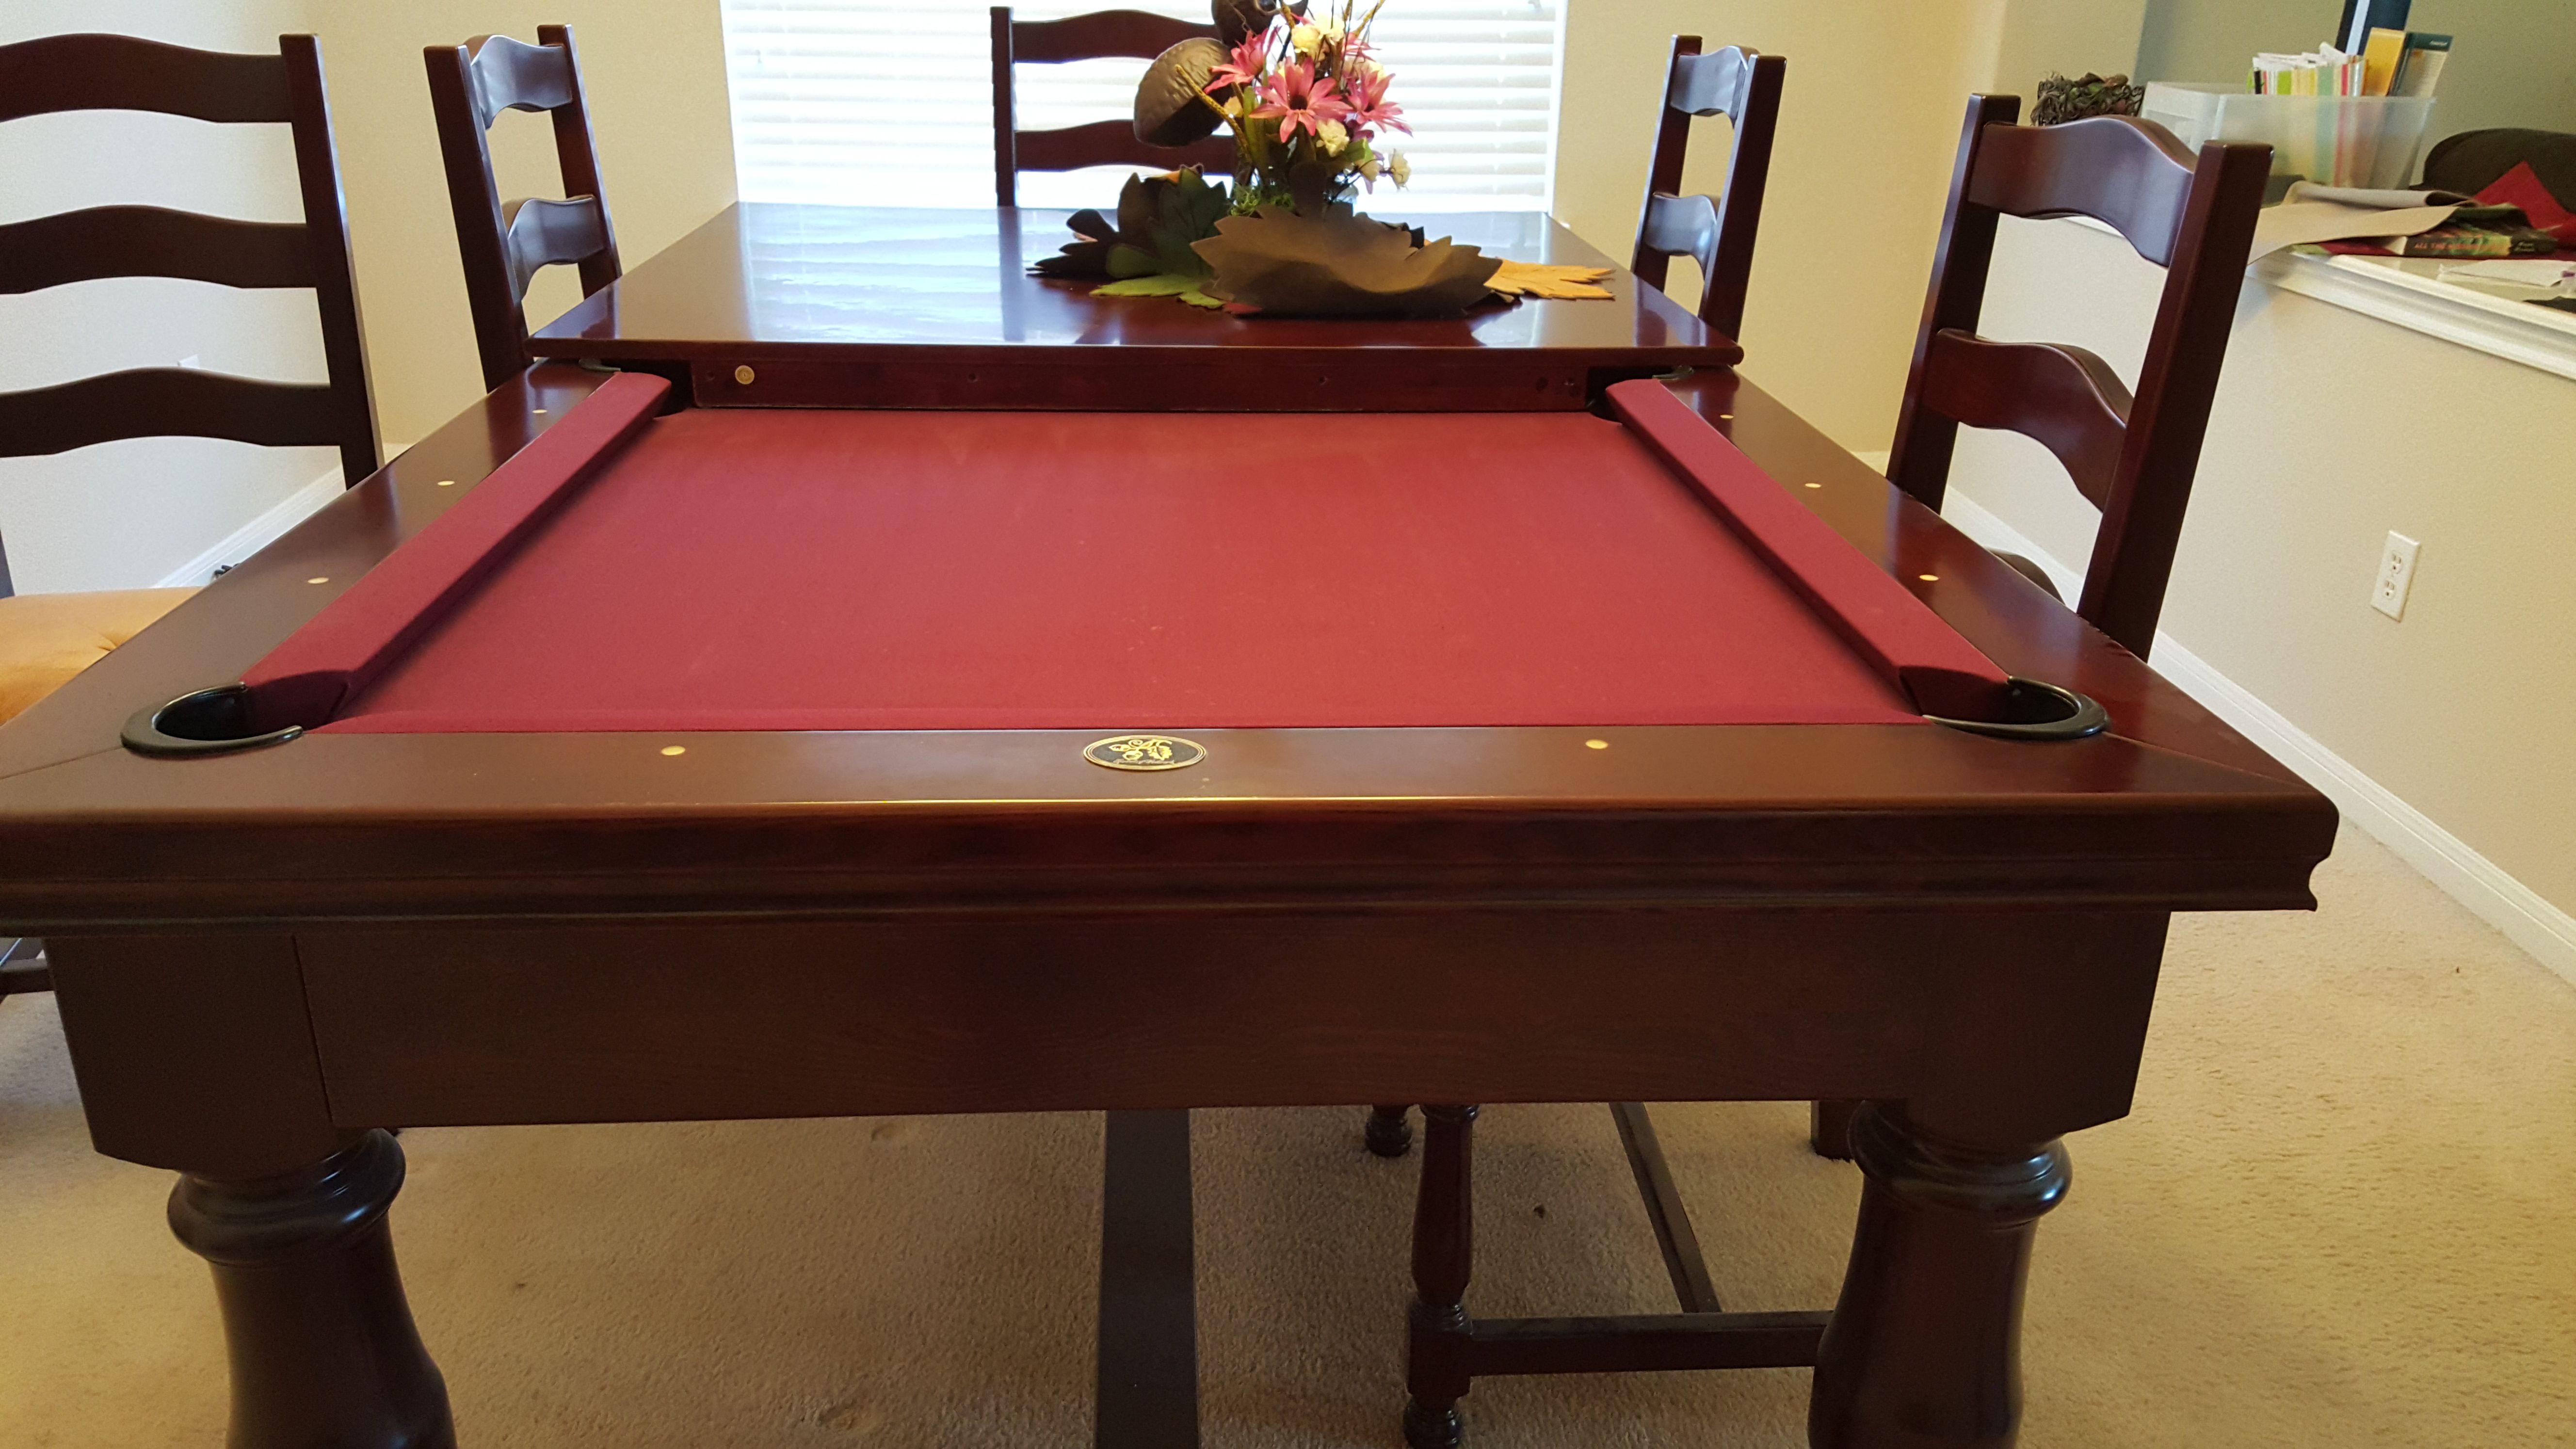 7ft slate pool table/ dining room table w/ chairs